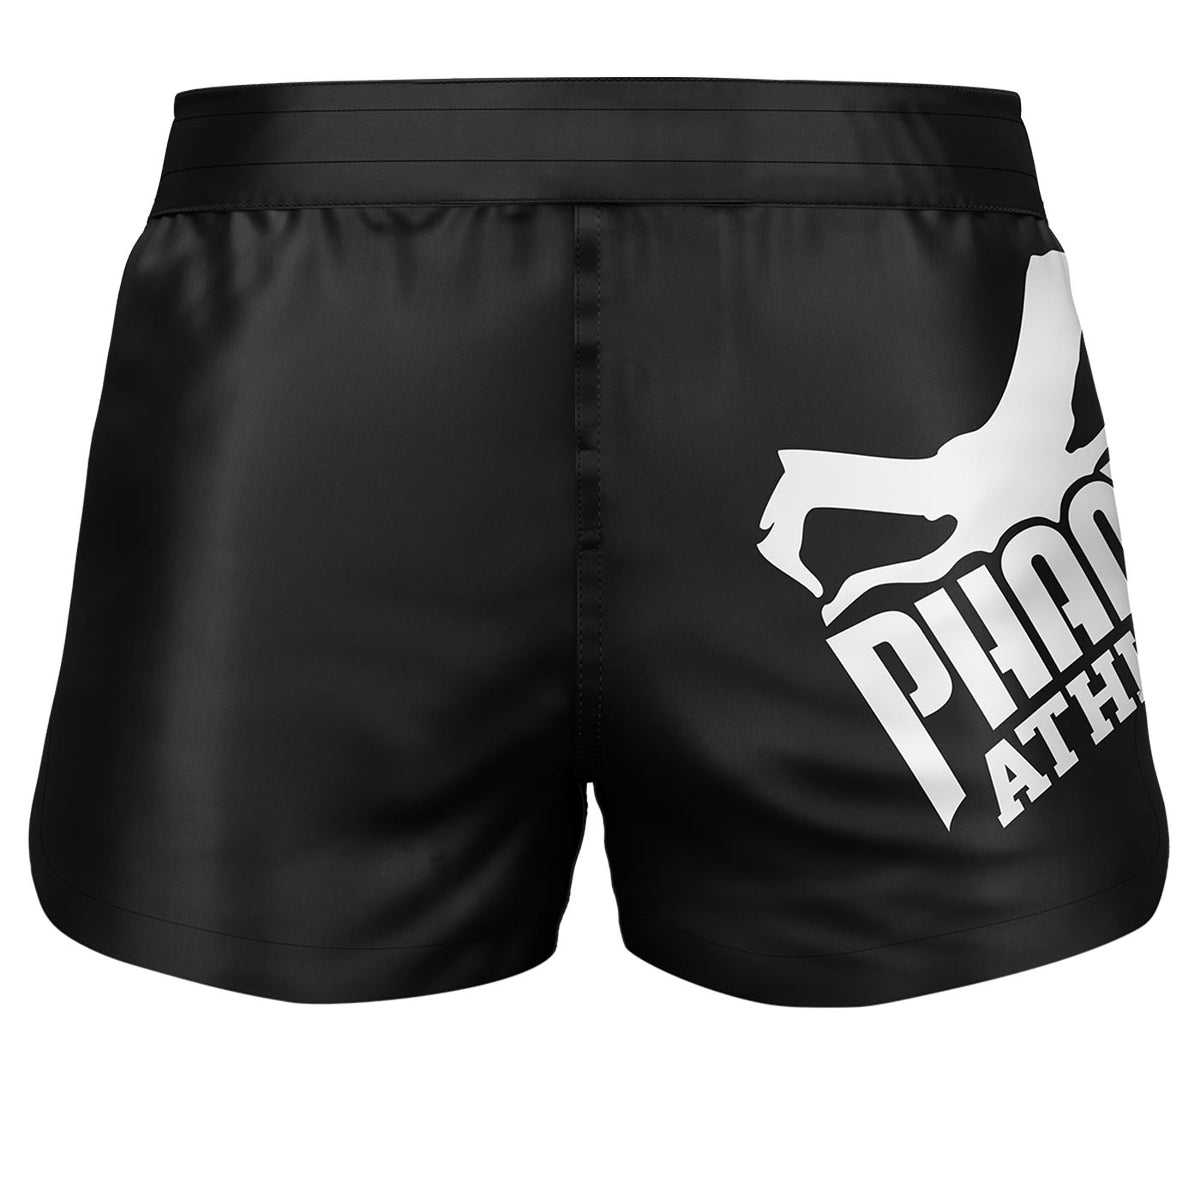 Phantom Fightshorts Fusion 2in1. Ultimate shorts for your martial arts. Ideal for MMA, Muay Thai, BJJ, wrestling and more. In black design with large Phantom logo.